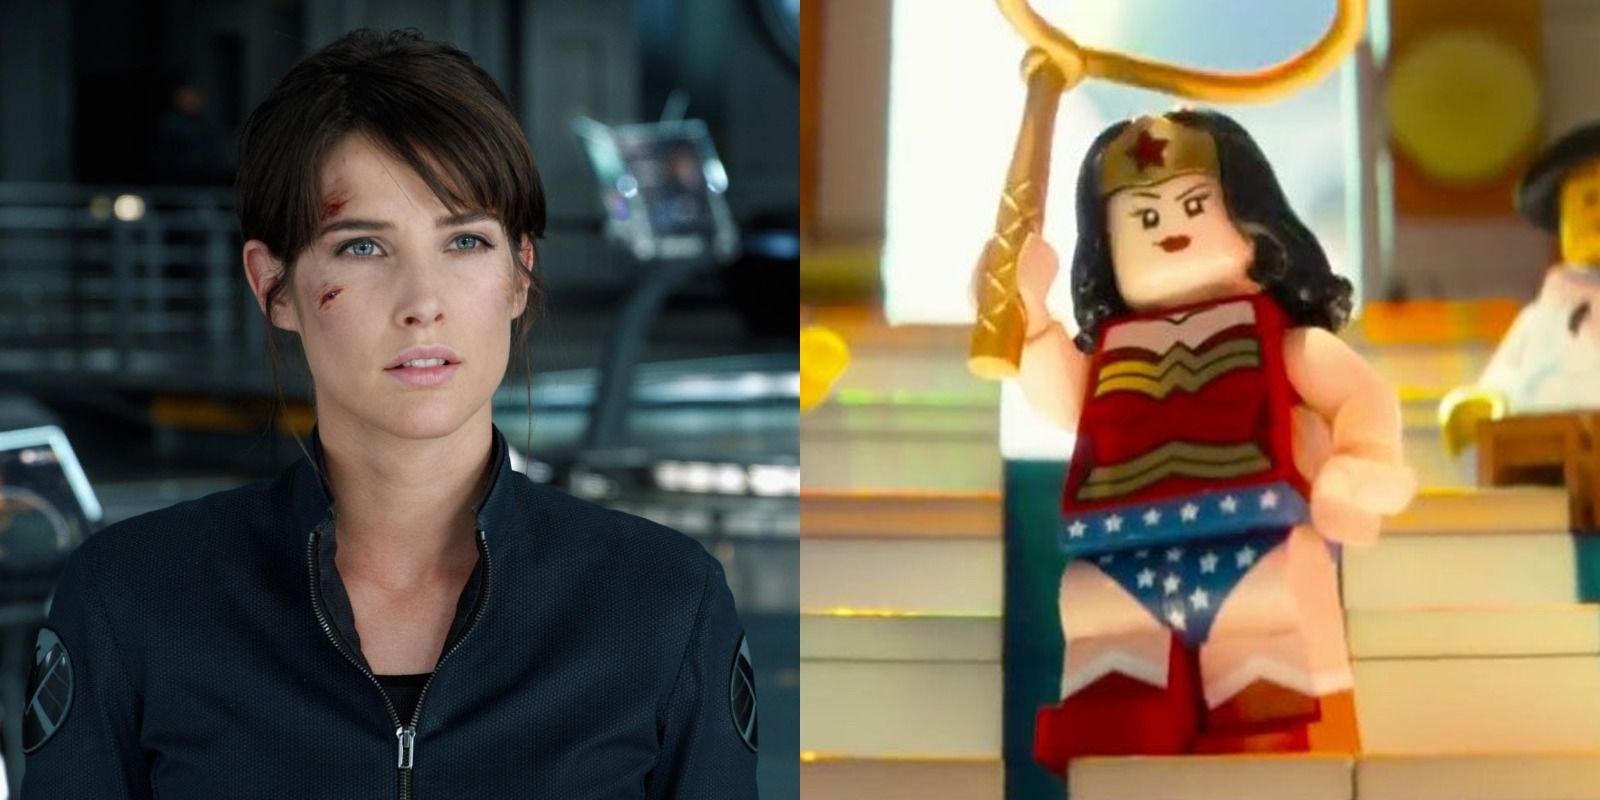 Maria Hill speaking with Nick Fury in Marvel's The Avengers and Wonder Woman wielding her Lasso Of Truth in The LEGO Movie